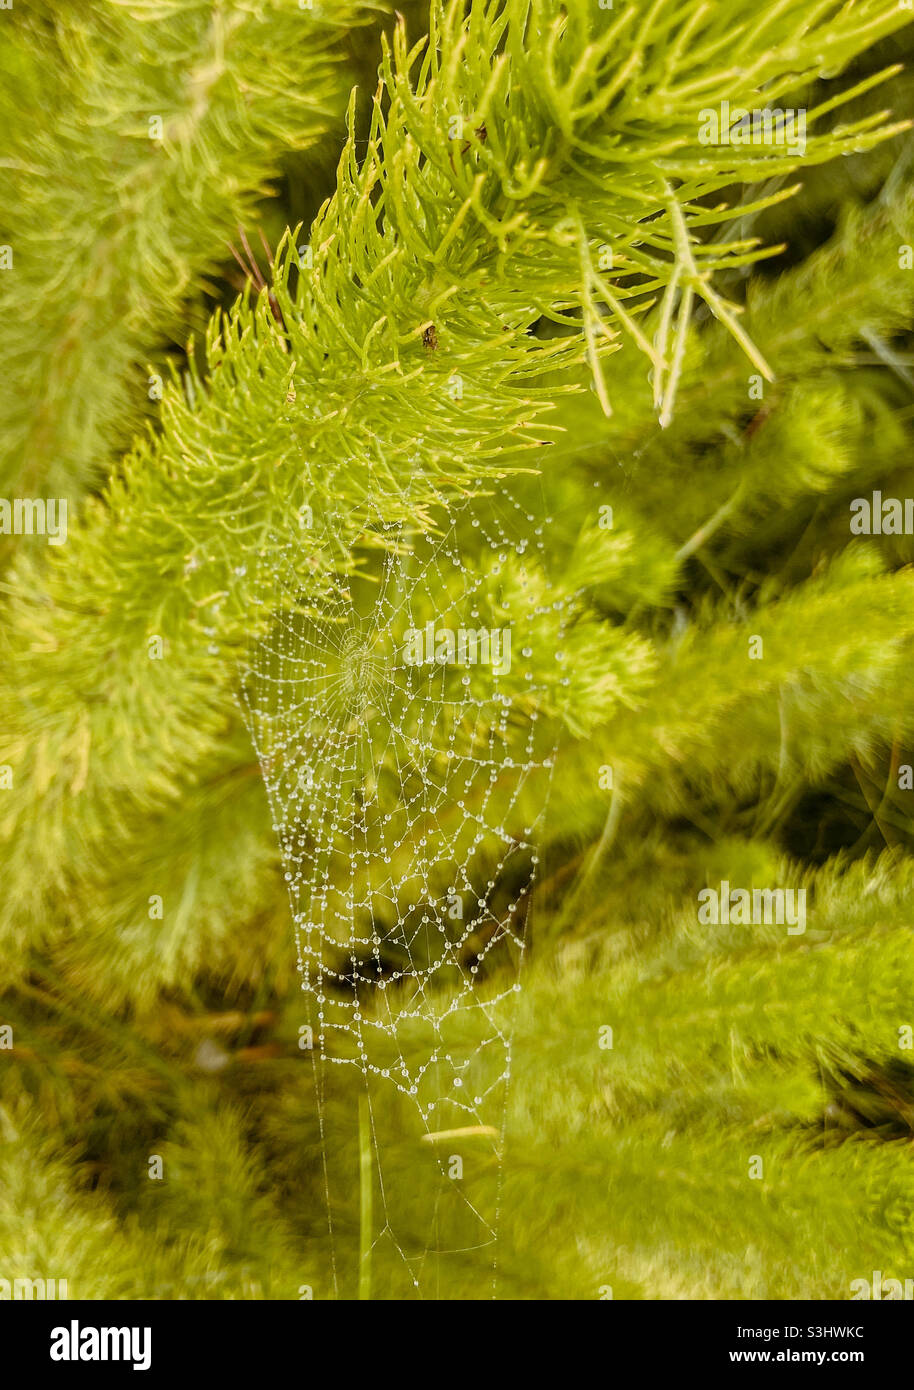 Spider web amongst plants with raindrops caught on the web Stock Photo